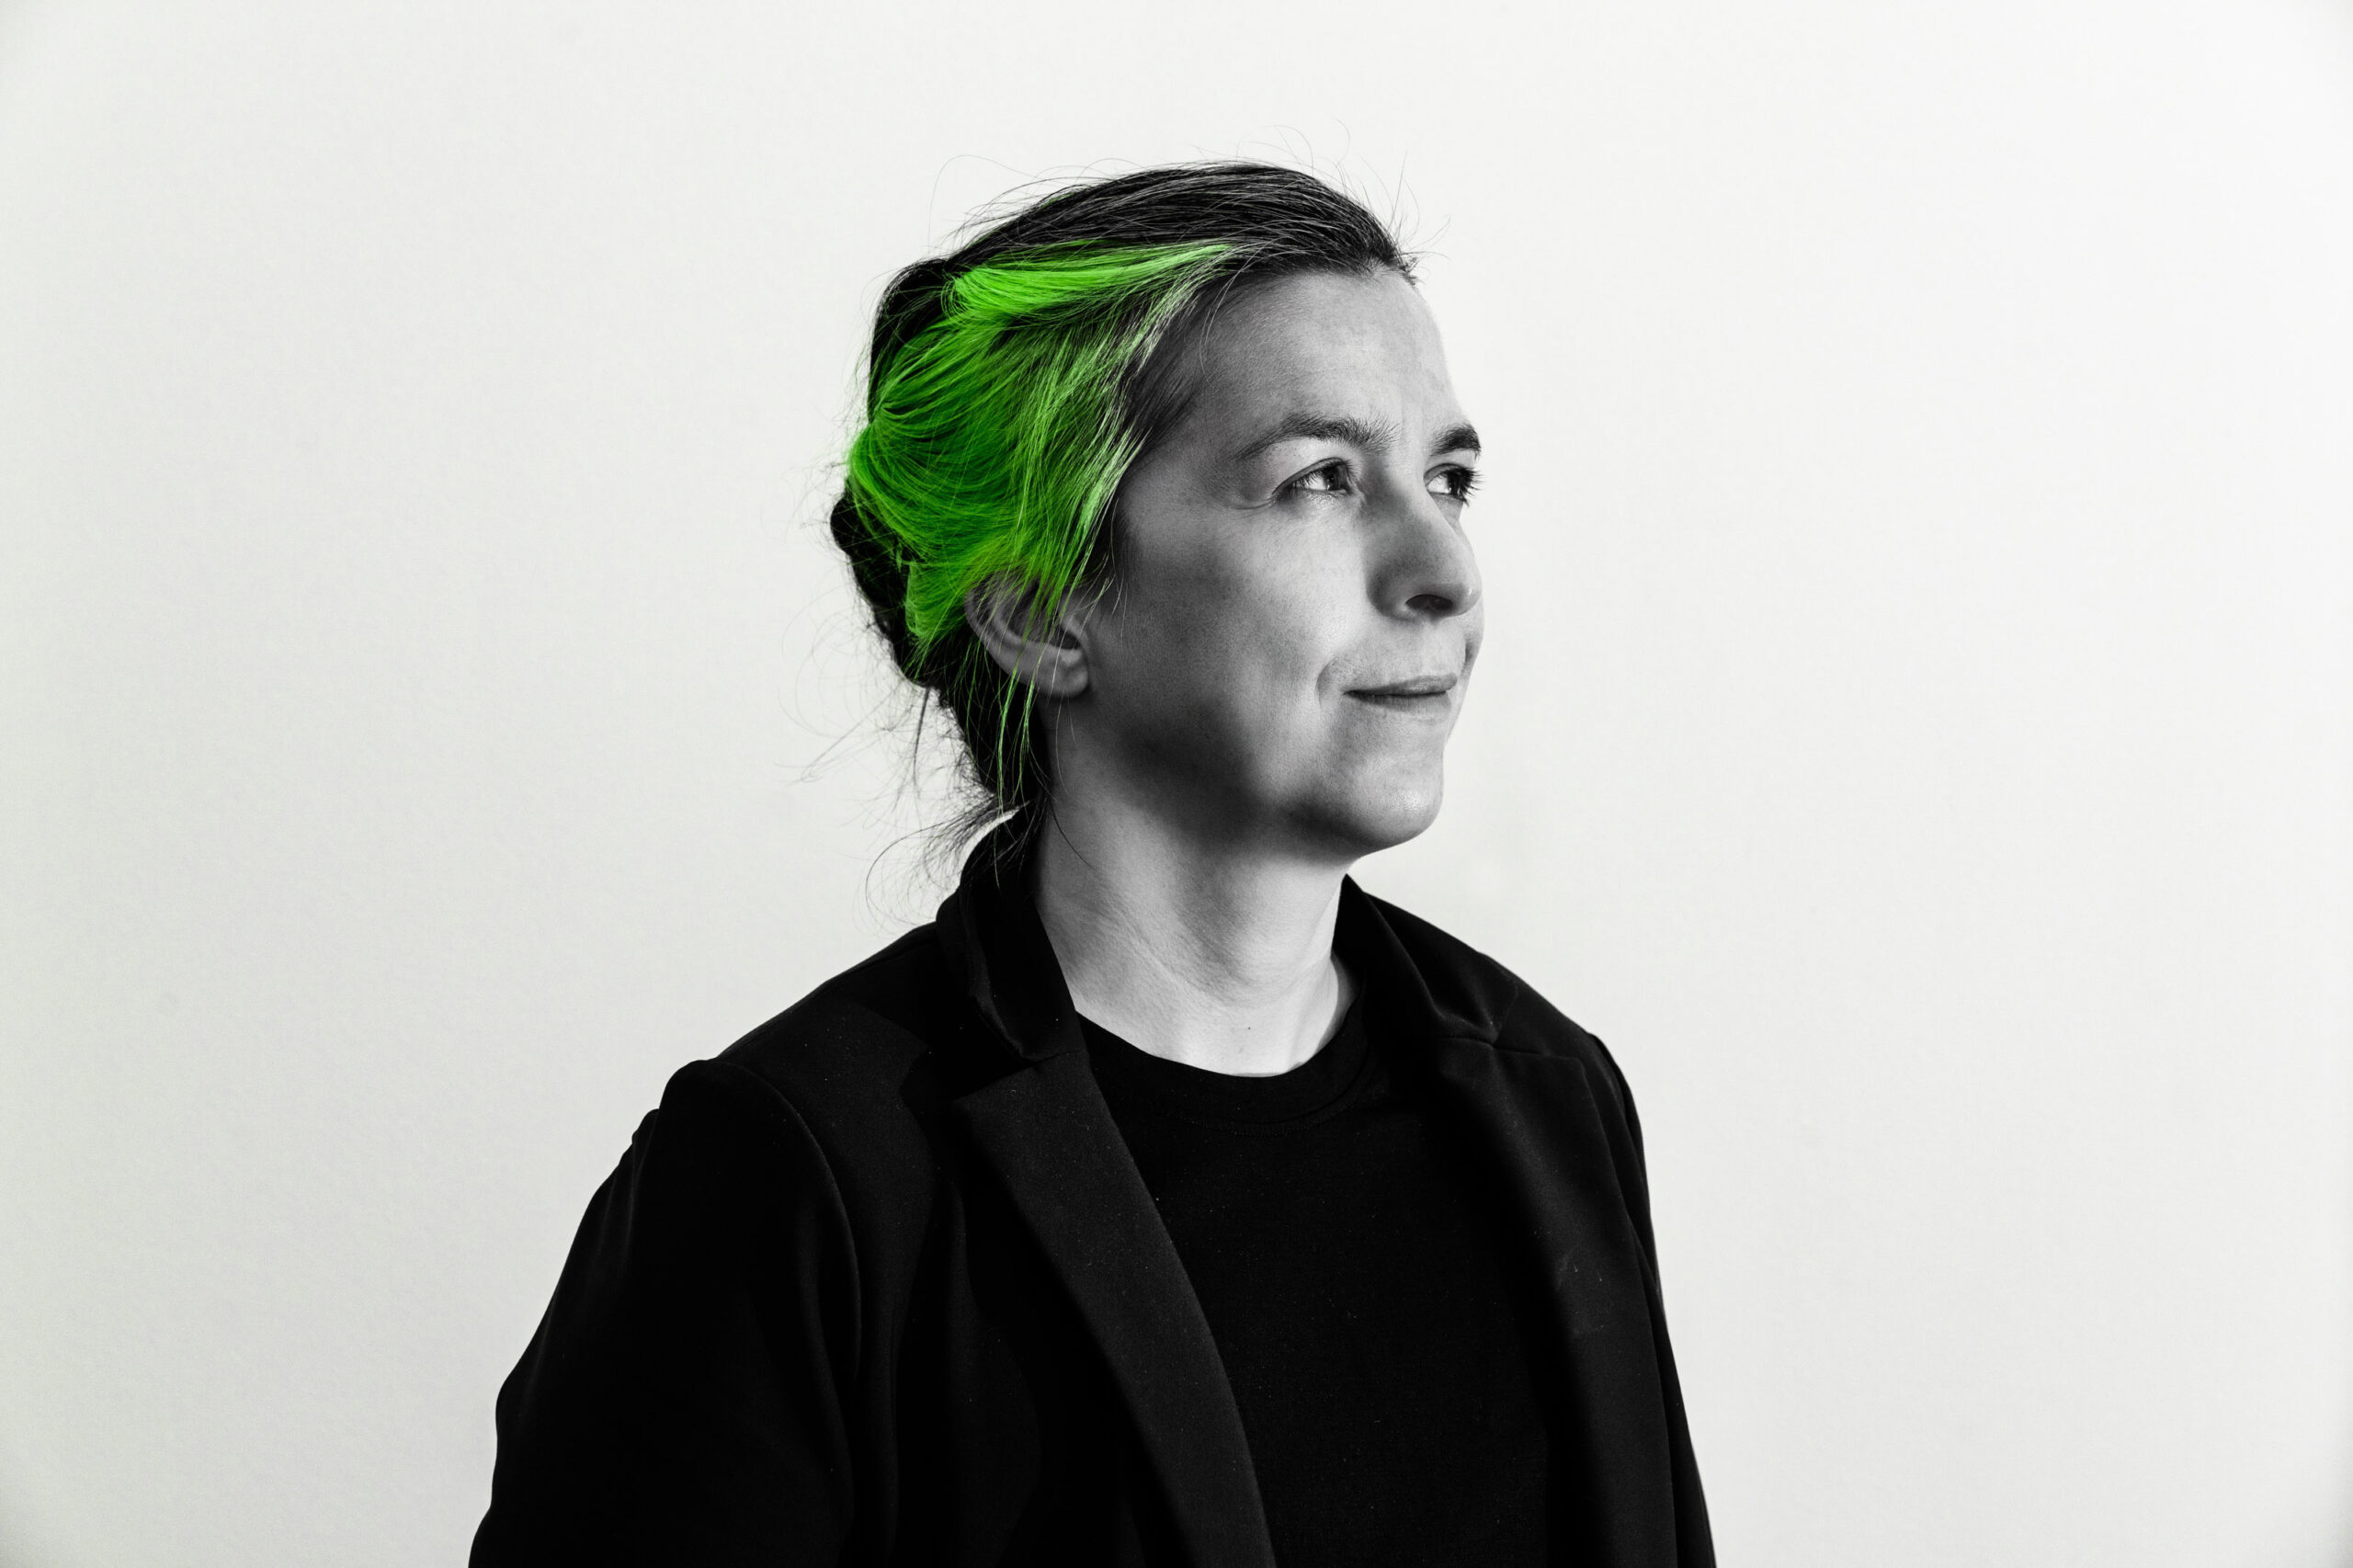 Headshot photo of Amanda Wyatt Visconti, edited to grayscale except for the green-dyed piece of their hair